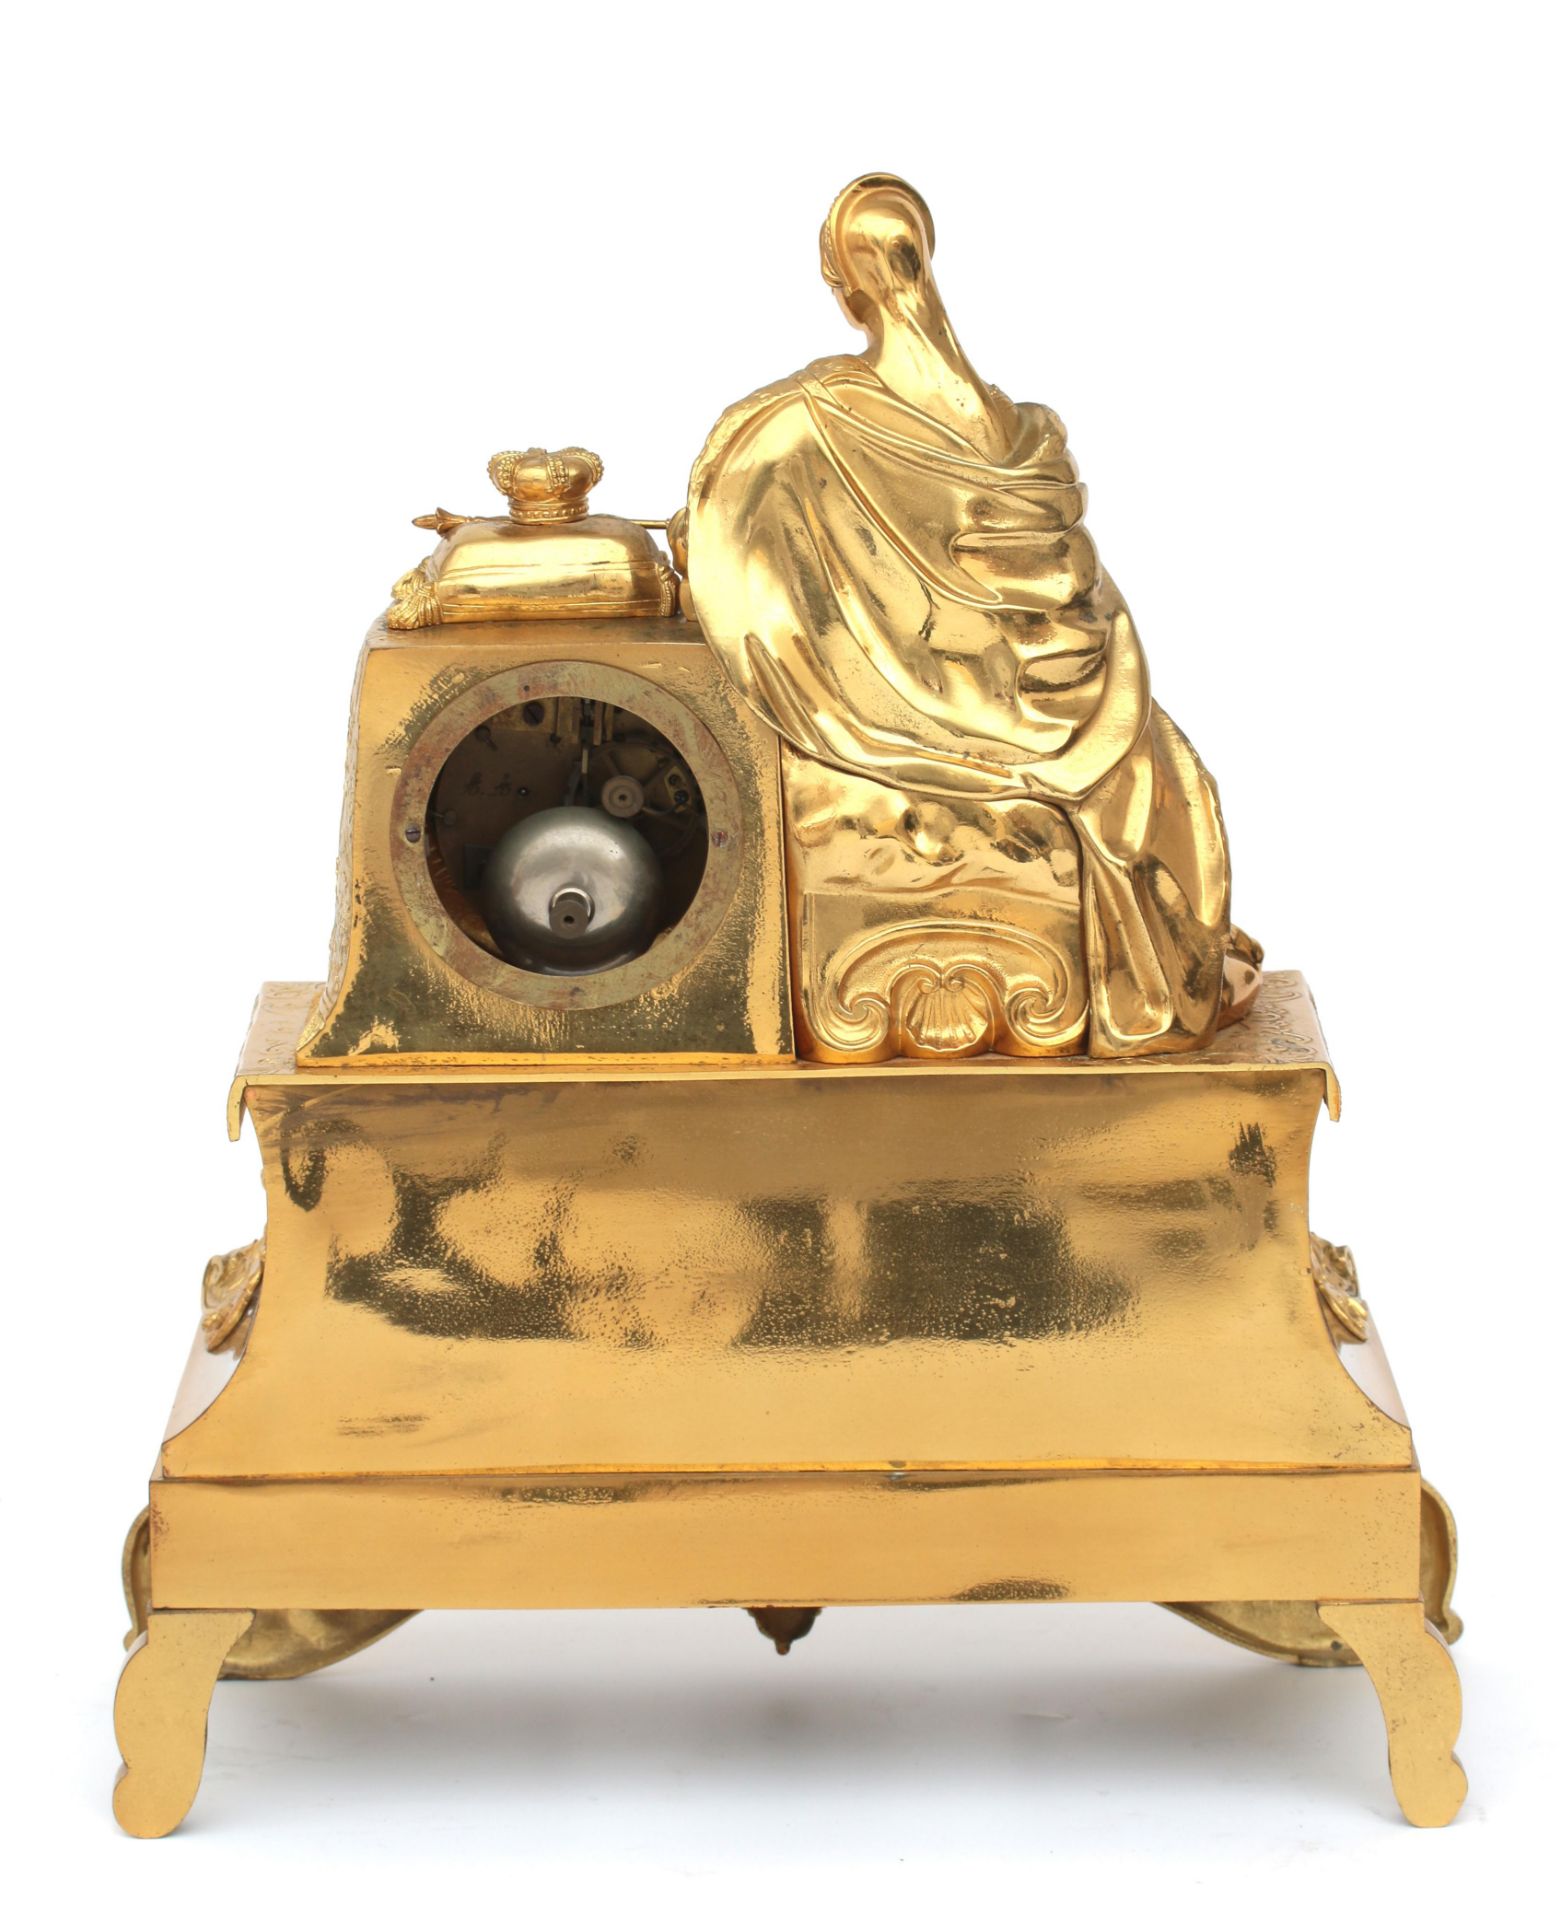 Newly gilt, de case crowned with a lady seated with regalia (crown damaged), de dial face with - Bild 2 aus 5